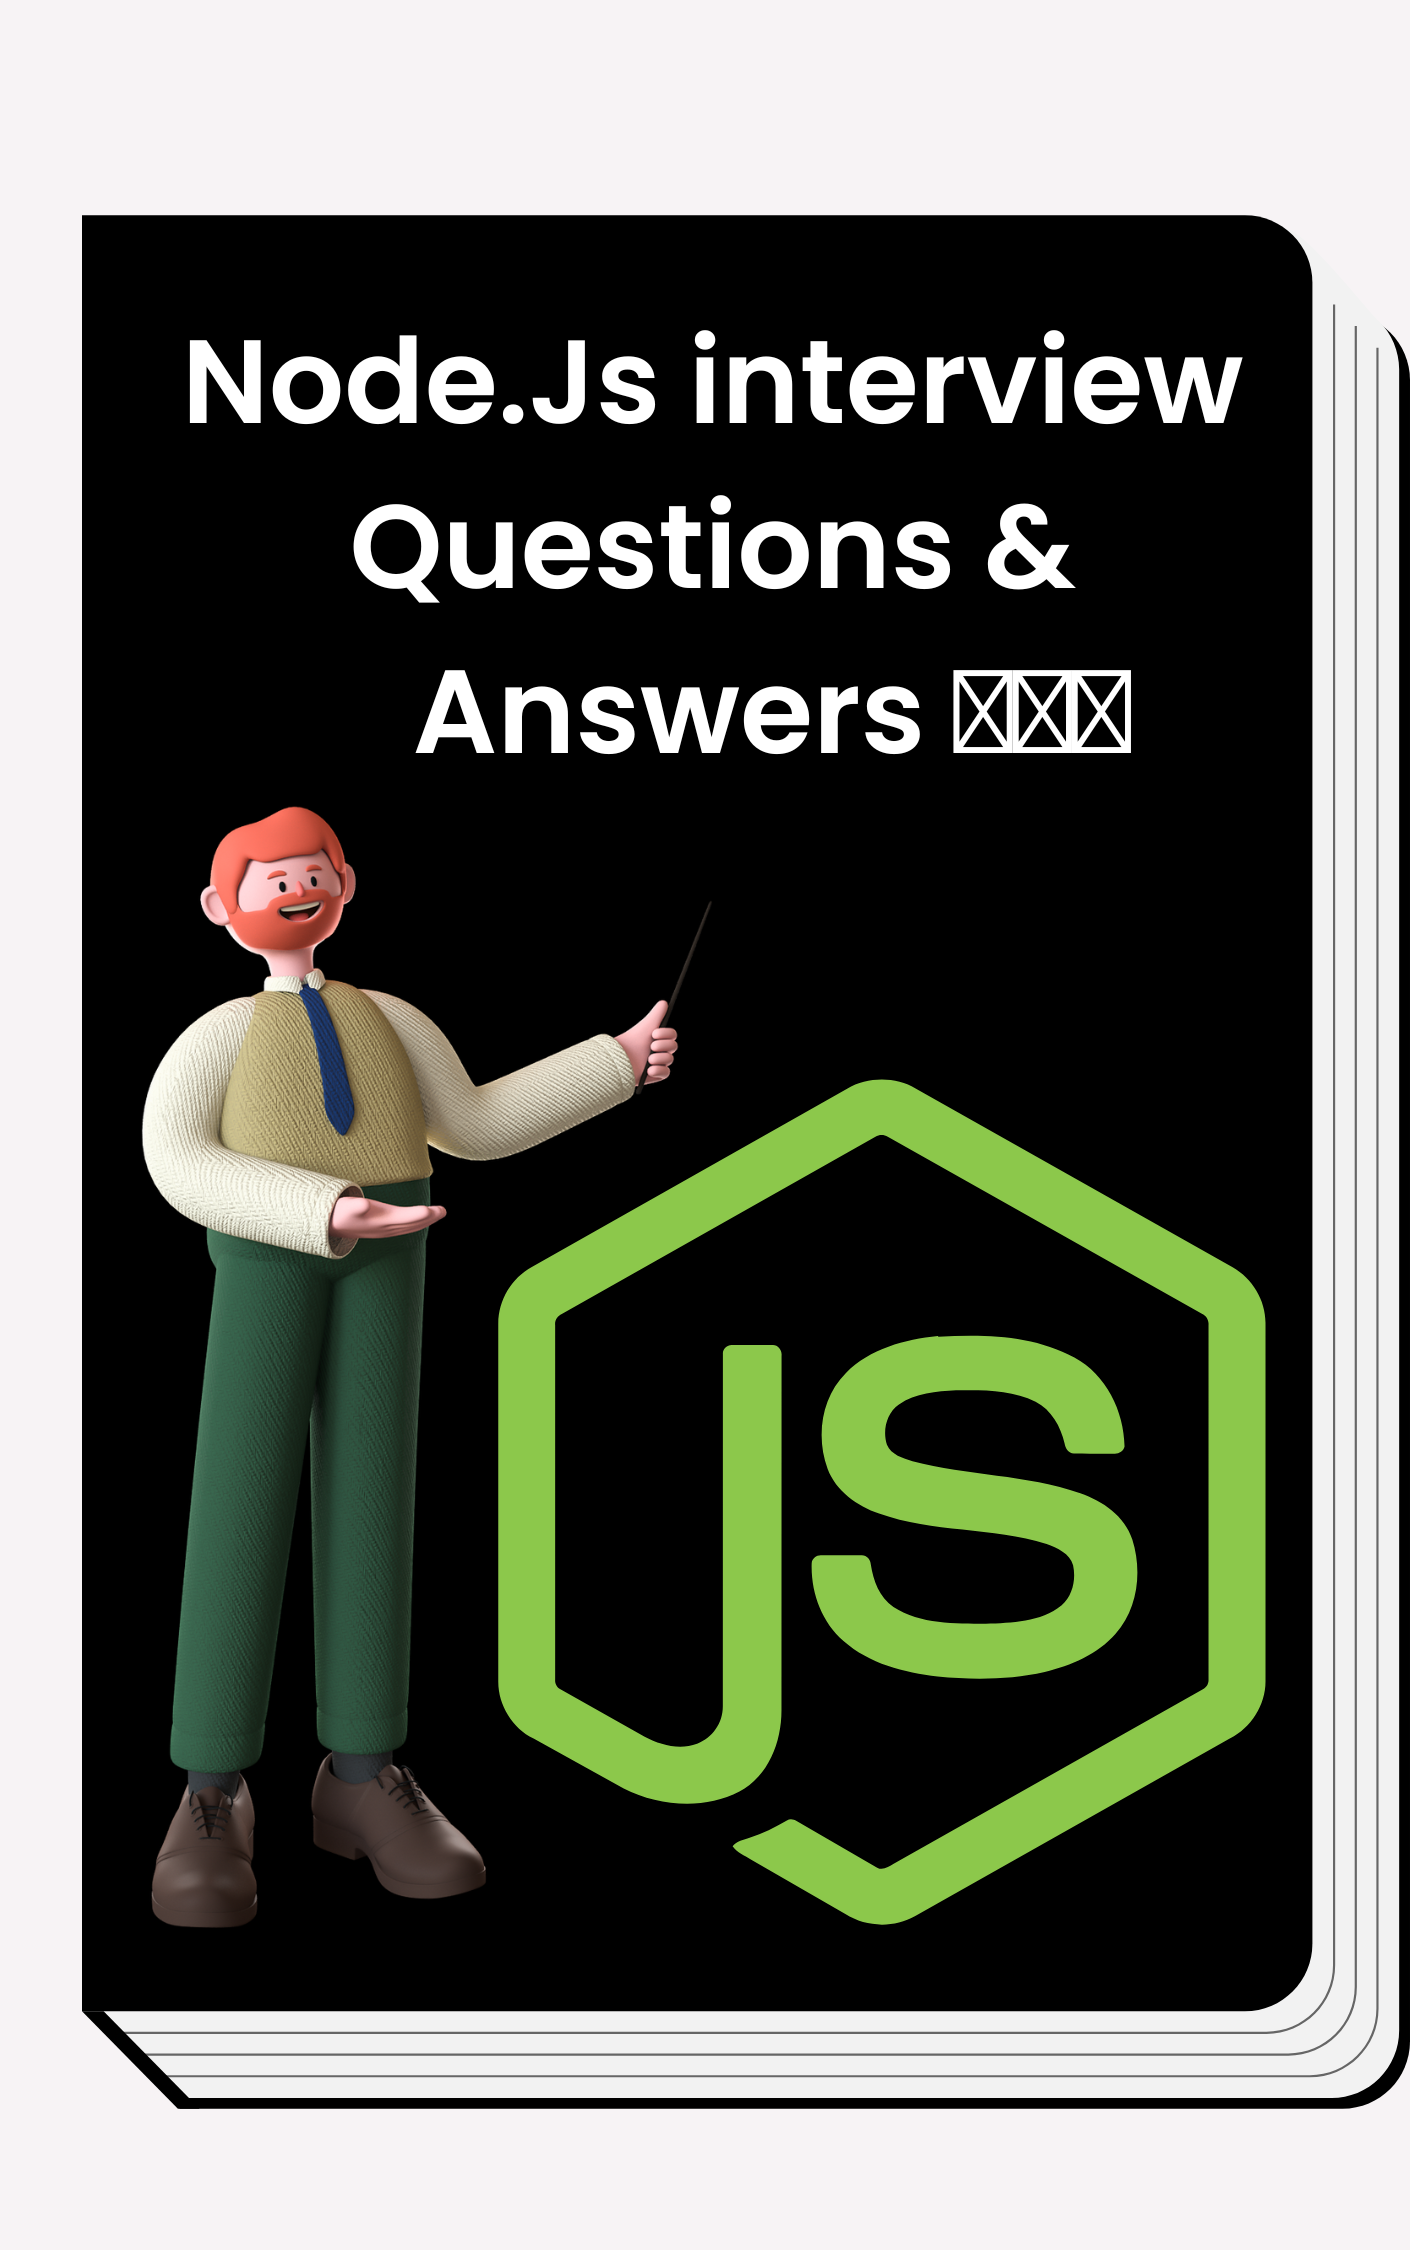 nodejs interview questions and answers pdf